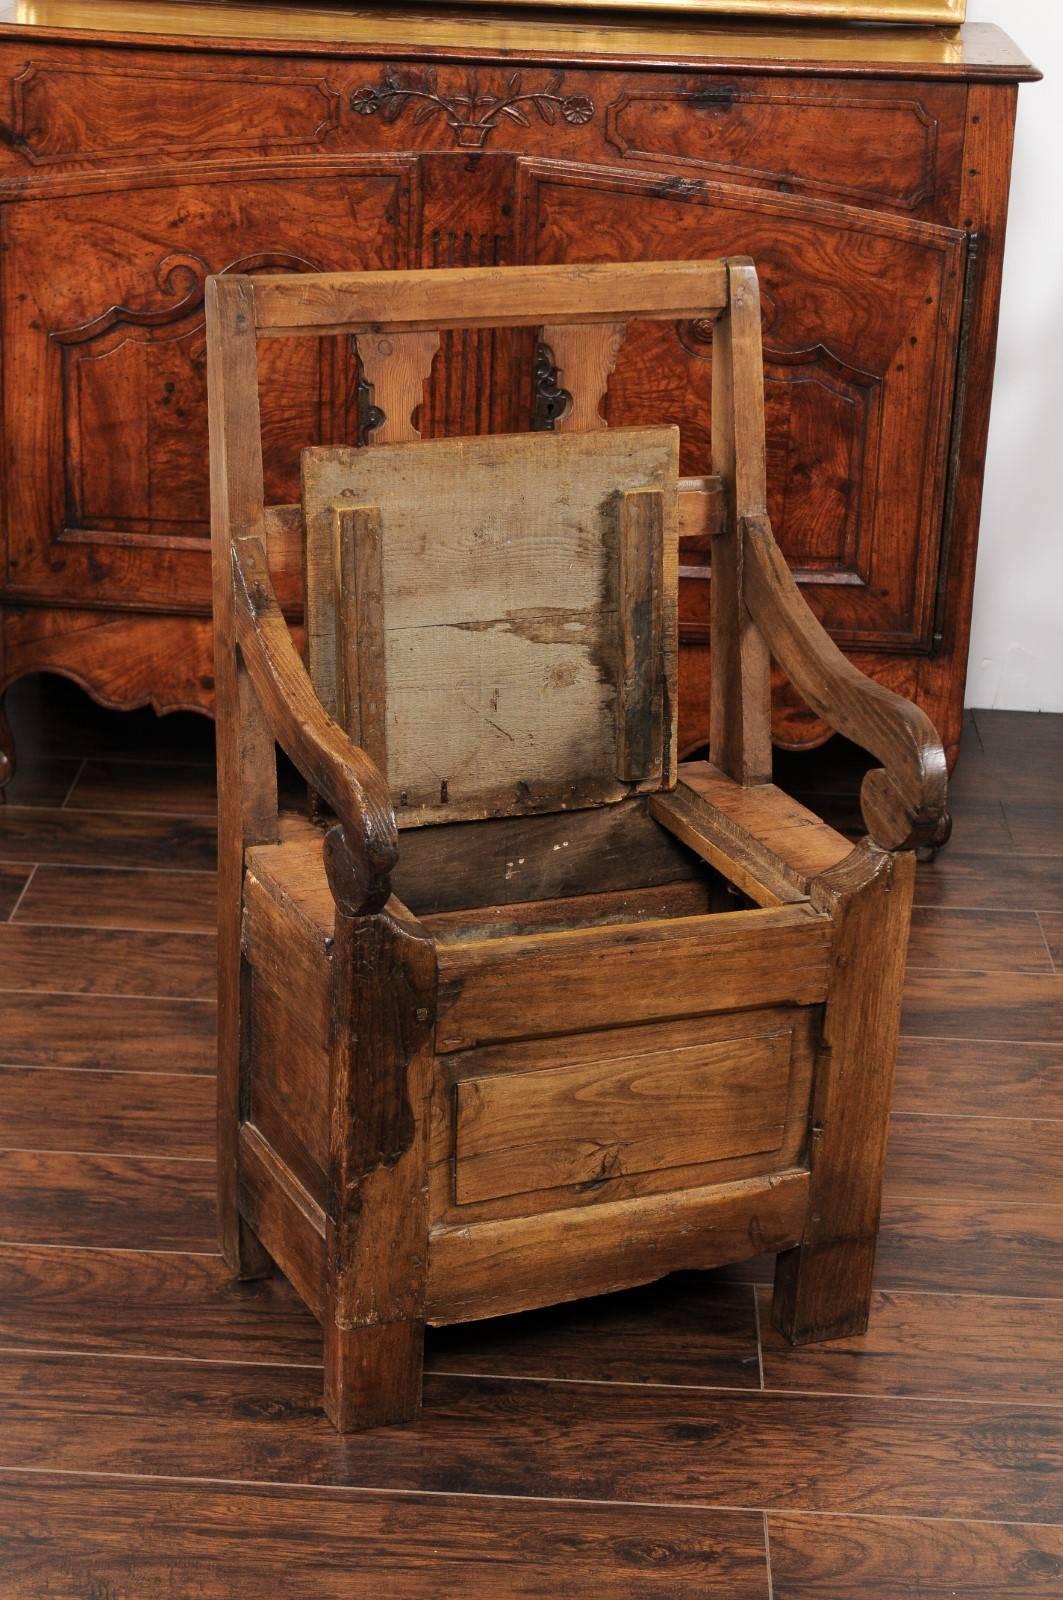 Rustic English Country Pine Chair circa 1800 with Scrolled Arms and Lift-Top Seat For Sale